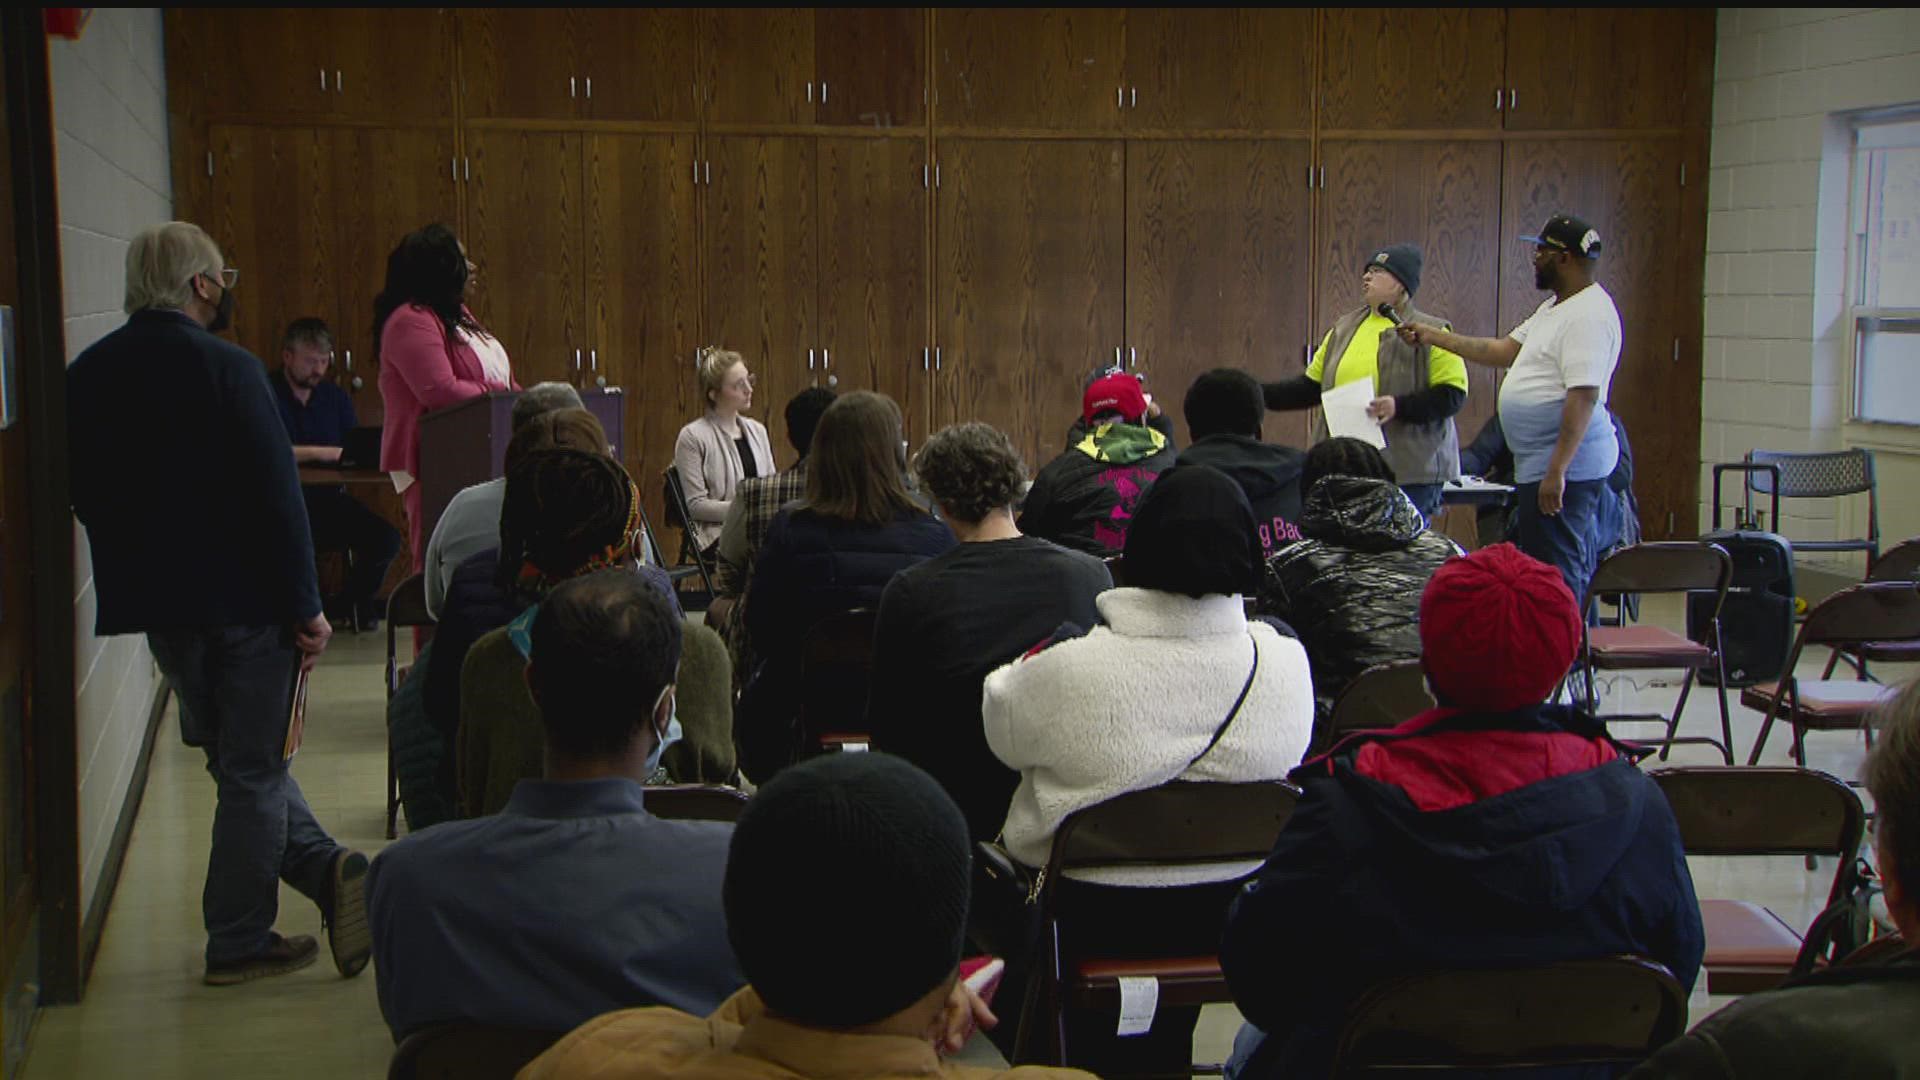 At the first of five listening sessions, community members expressed a desire for a new MPD chief who can improve accountability and tackle violent crime.